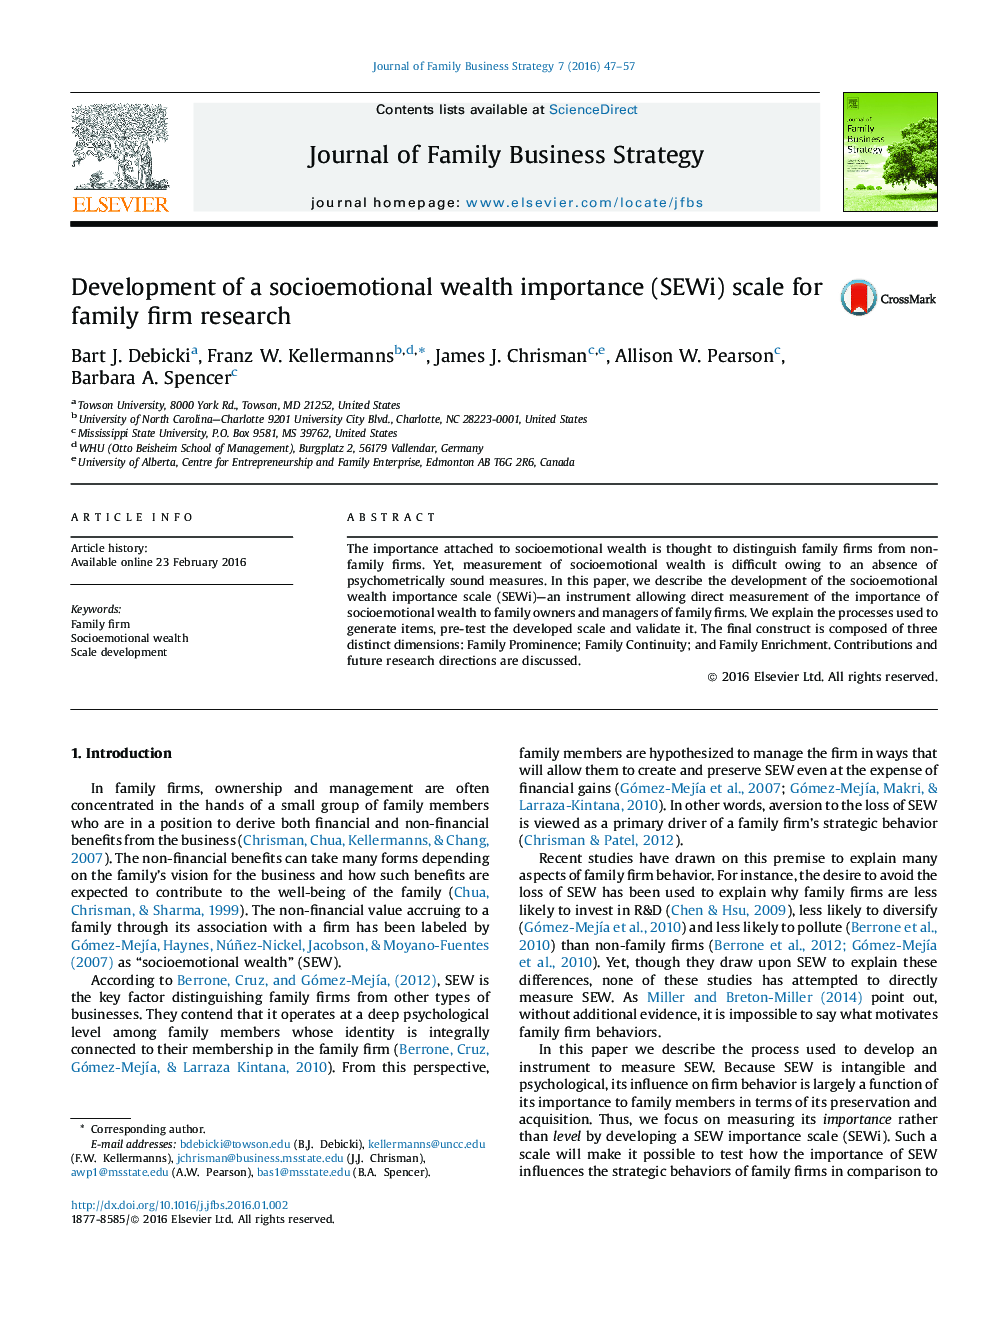 Development of a socioemotional wealth importance (SEWi) scale for family firm research